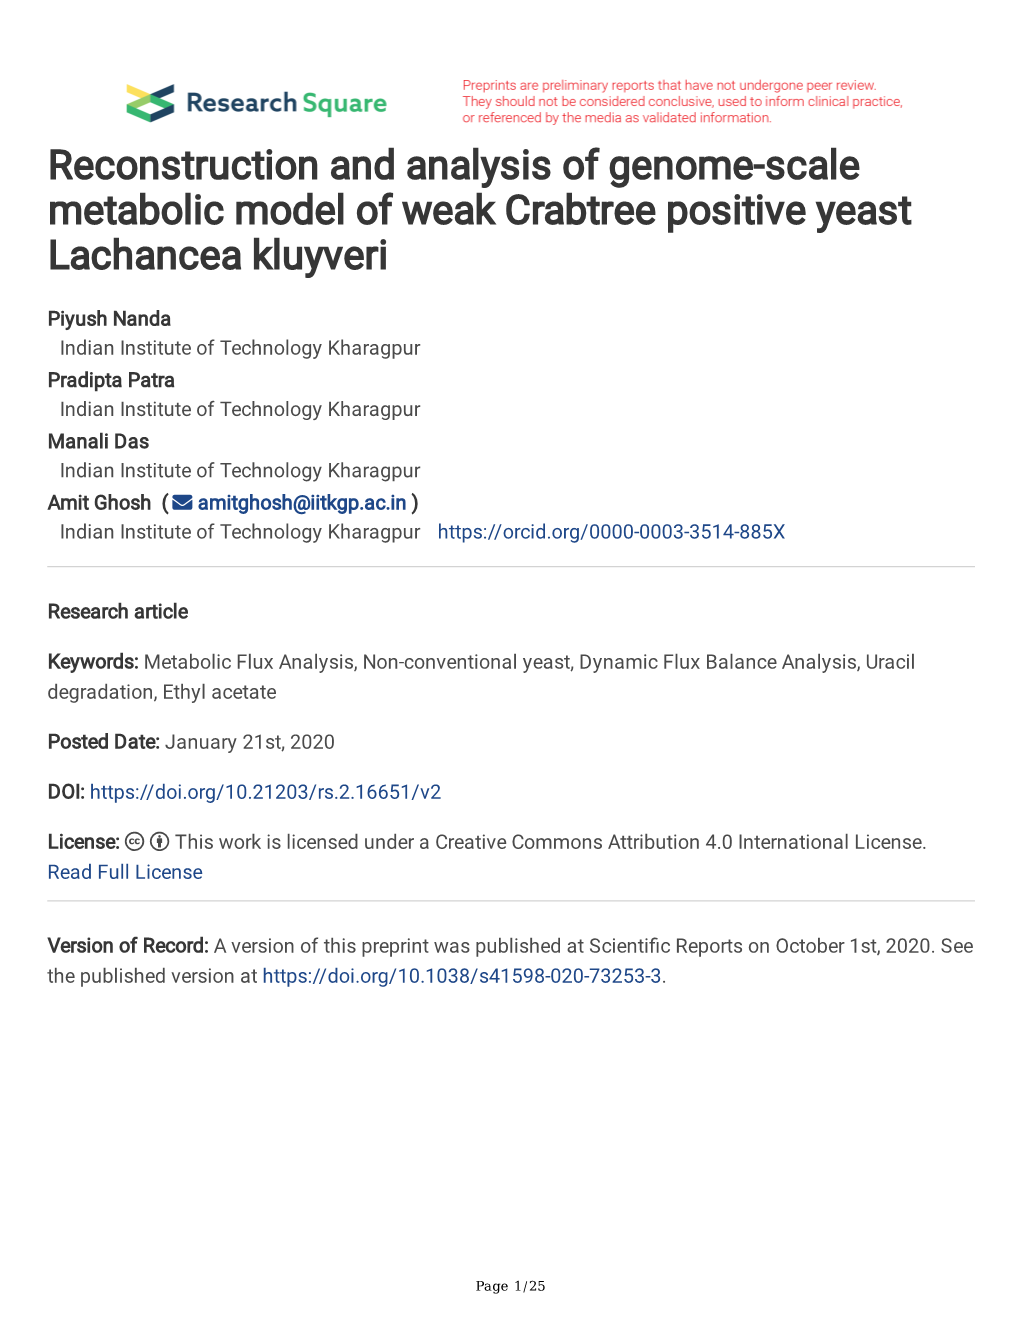 Reconstruction and Analysis of Genome-Scale Metabolic Model of Weak Crabtree Positive Yeast Lachancea Kluyveri